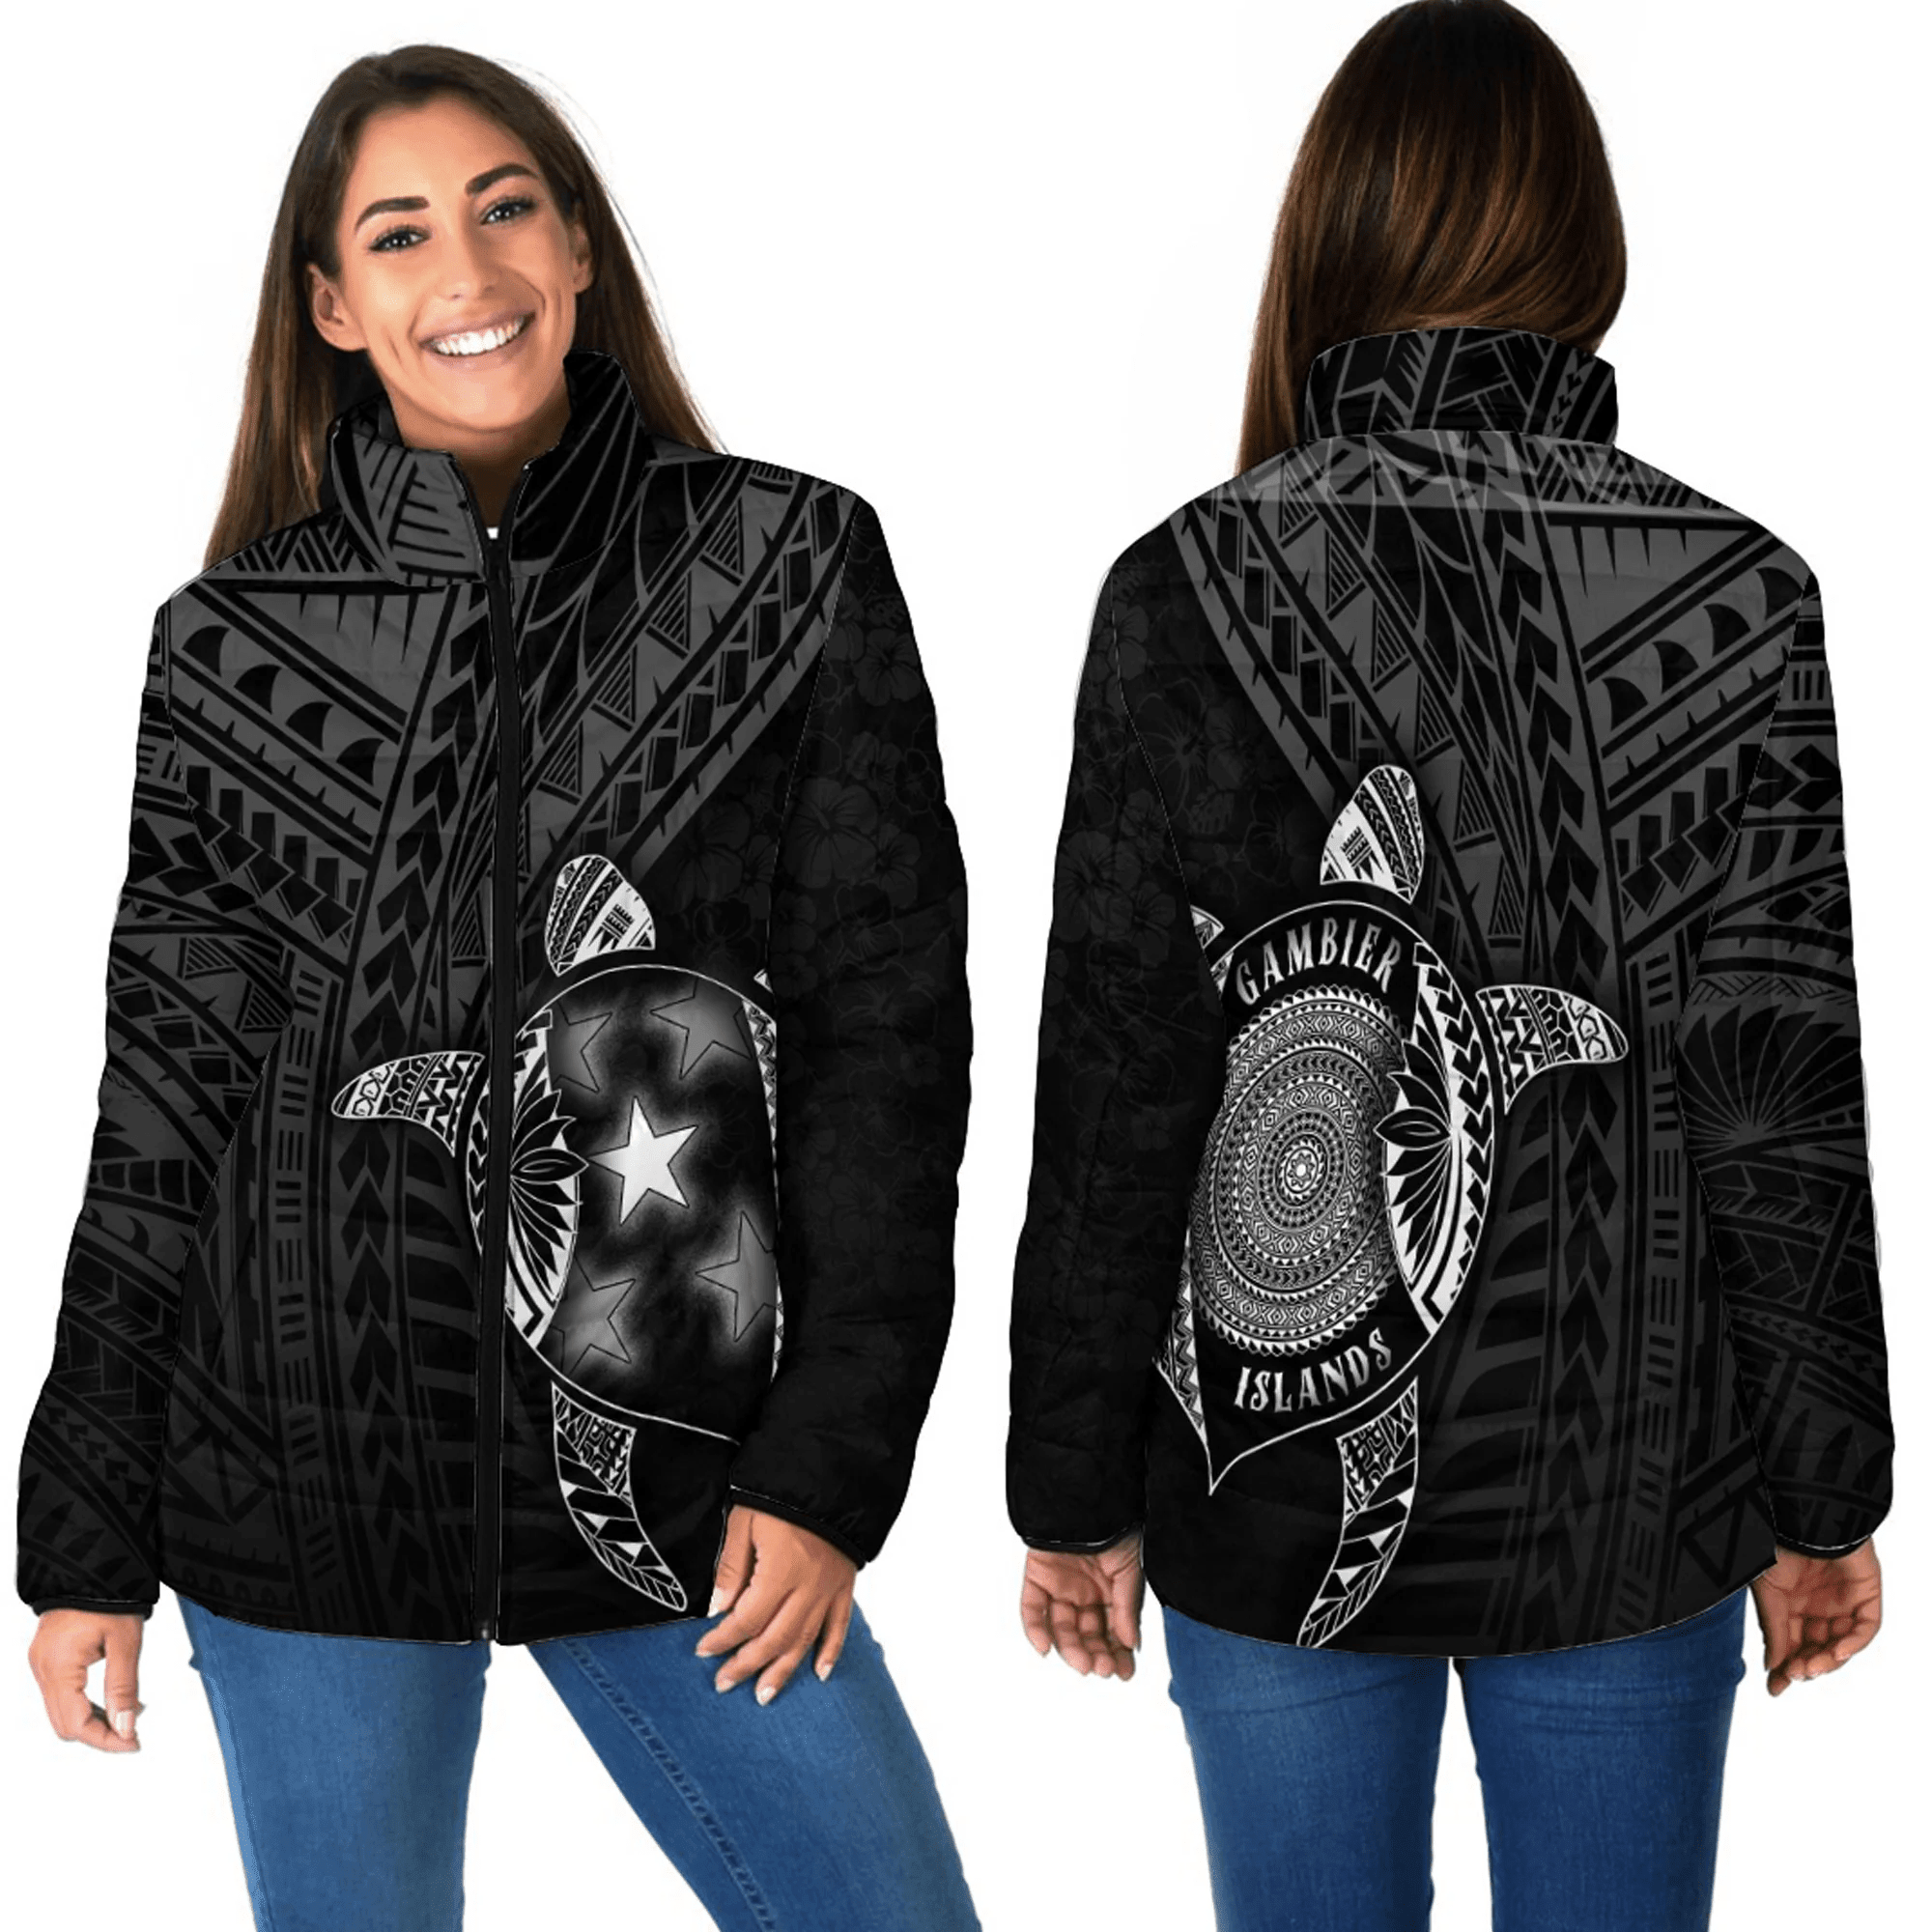 Love New Zealand Clothing - Gambier Islands Polynesia Turtle Coat Of Arms Women Padded Jacket A95 | Love New Zealand